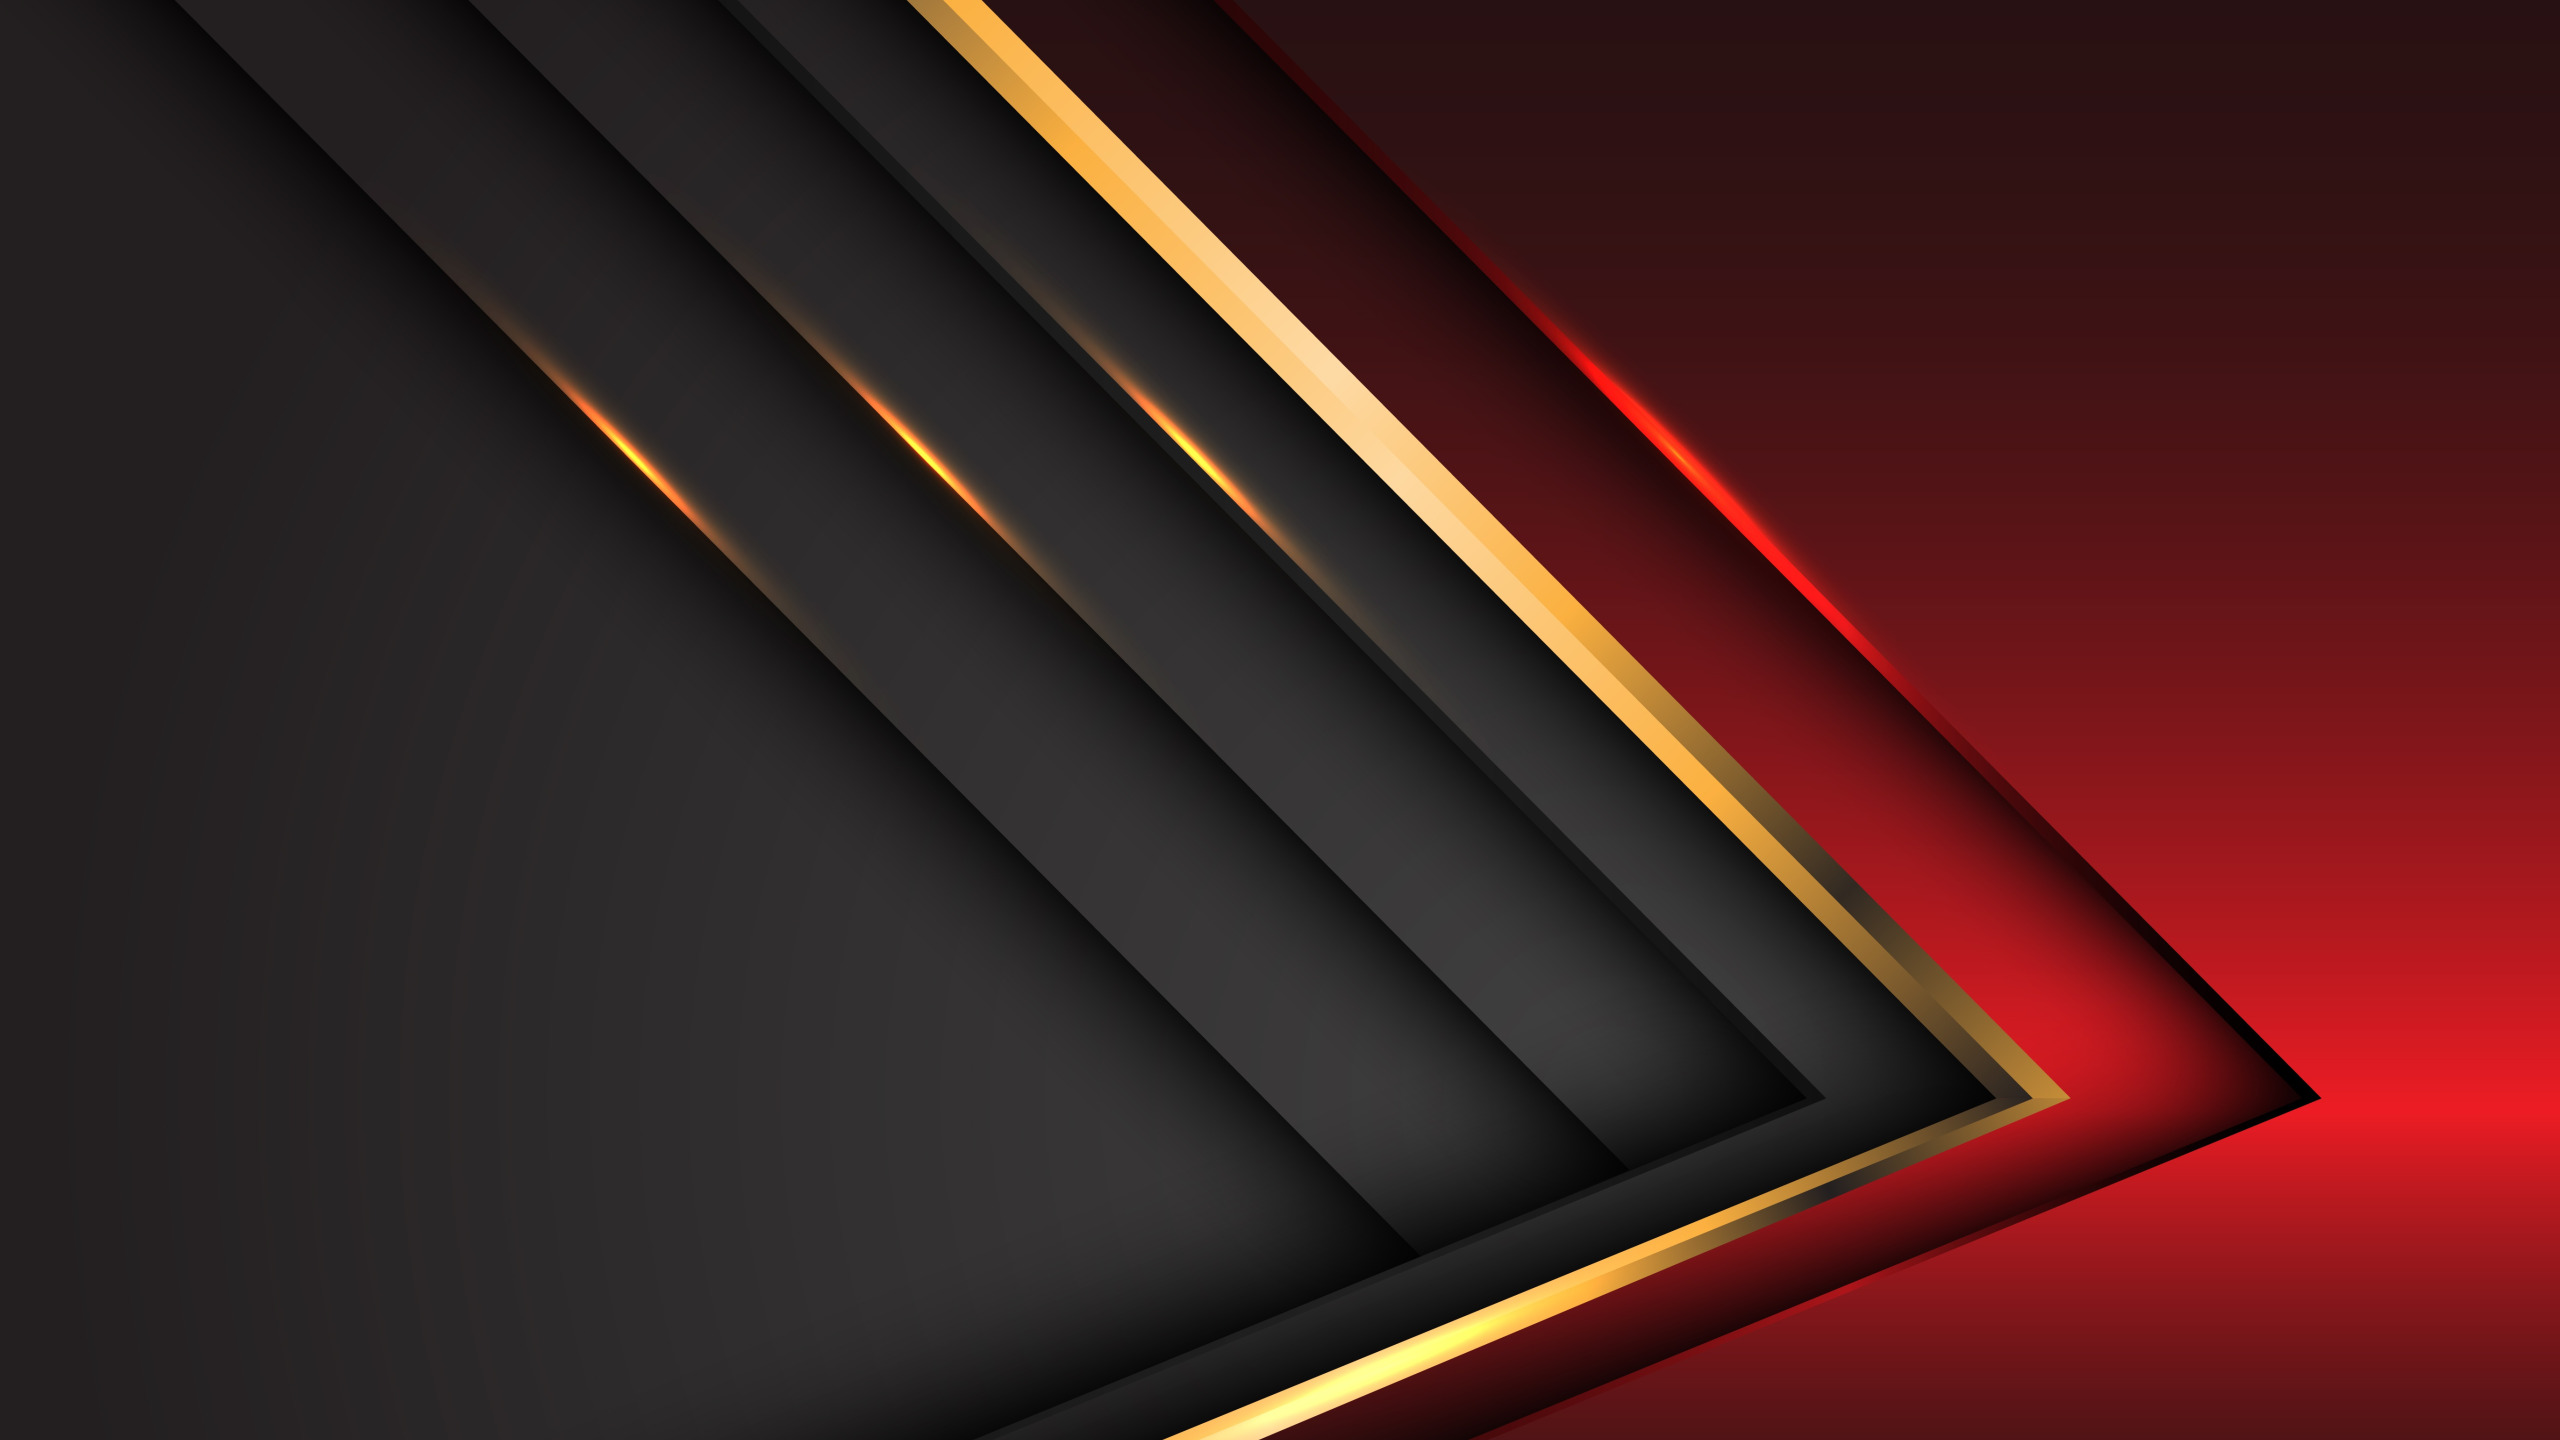 Download wallpaper line, red, grey, background, gold, background, section  abstraction in resolution 2560x1440